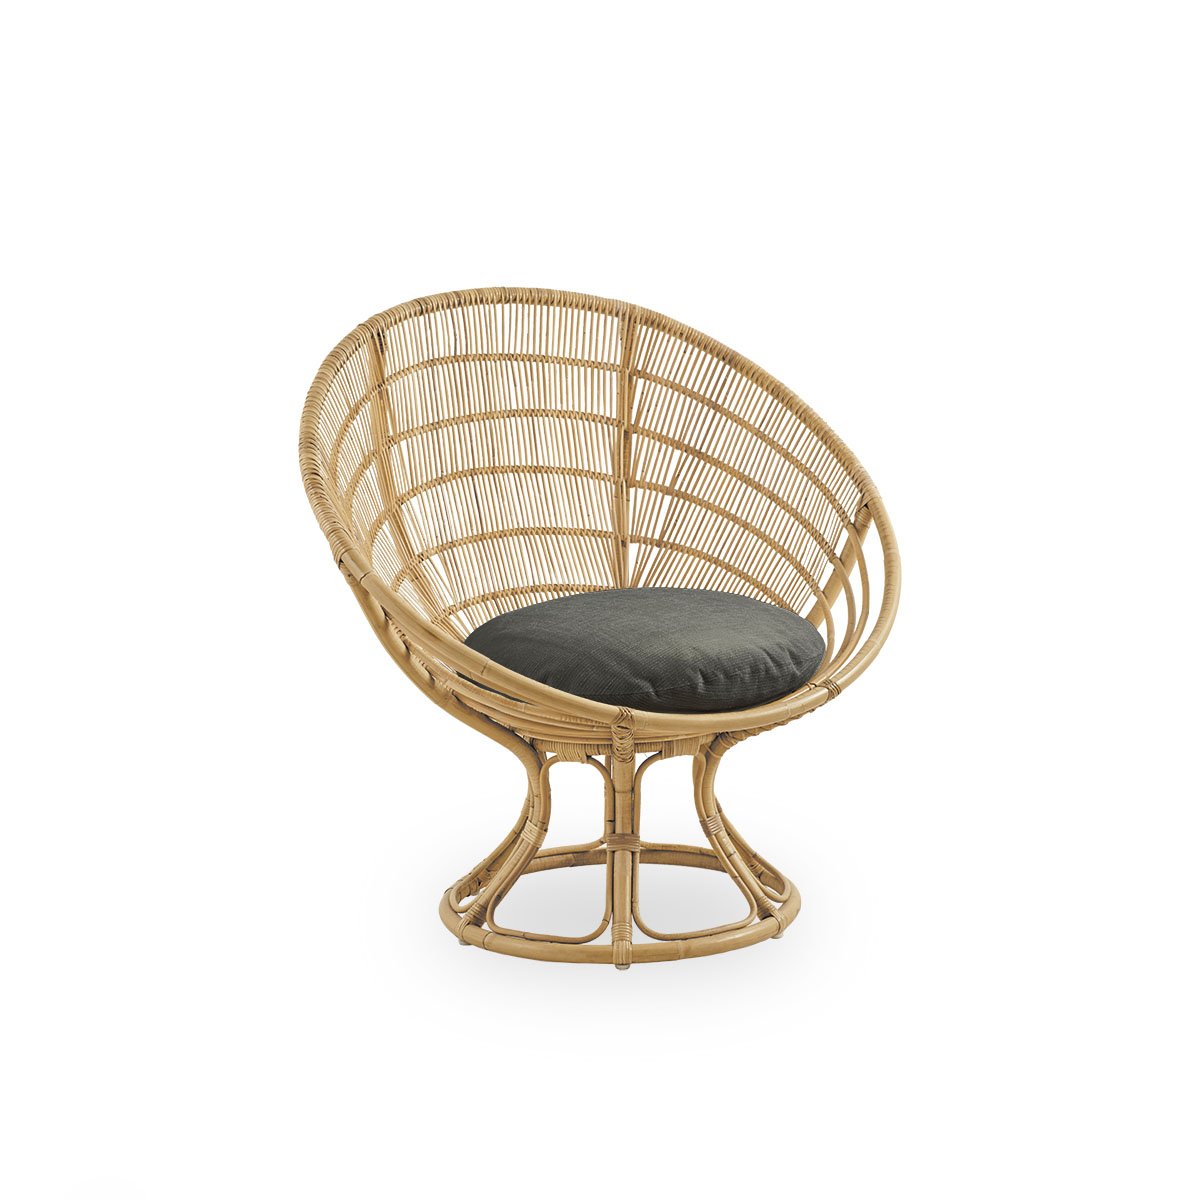 Luna Lounge Chair by Sika